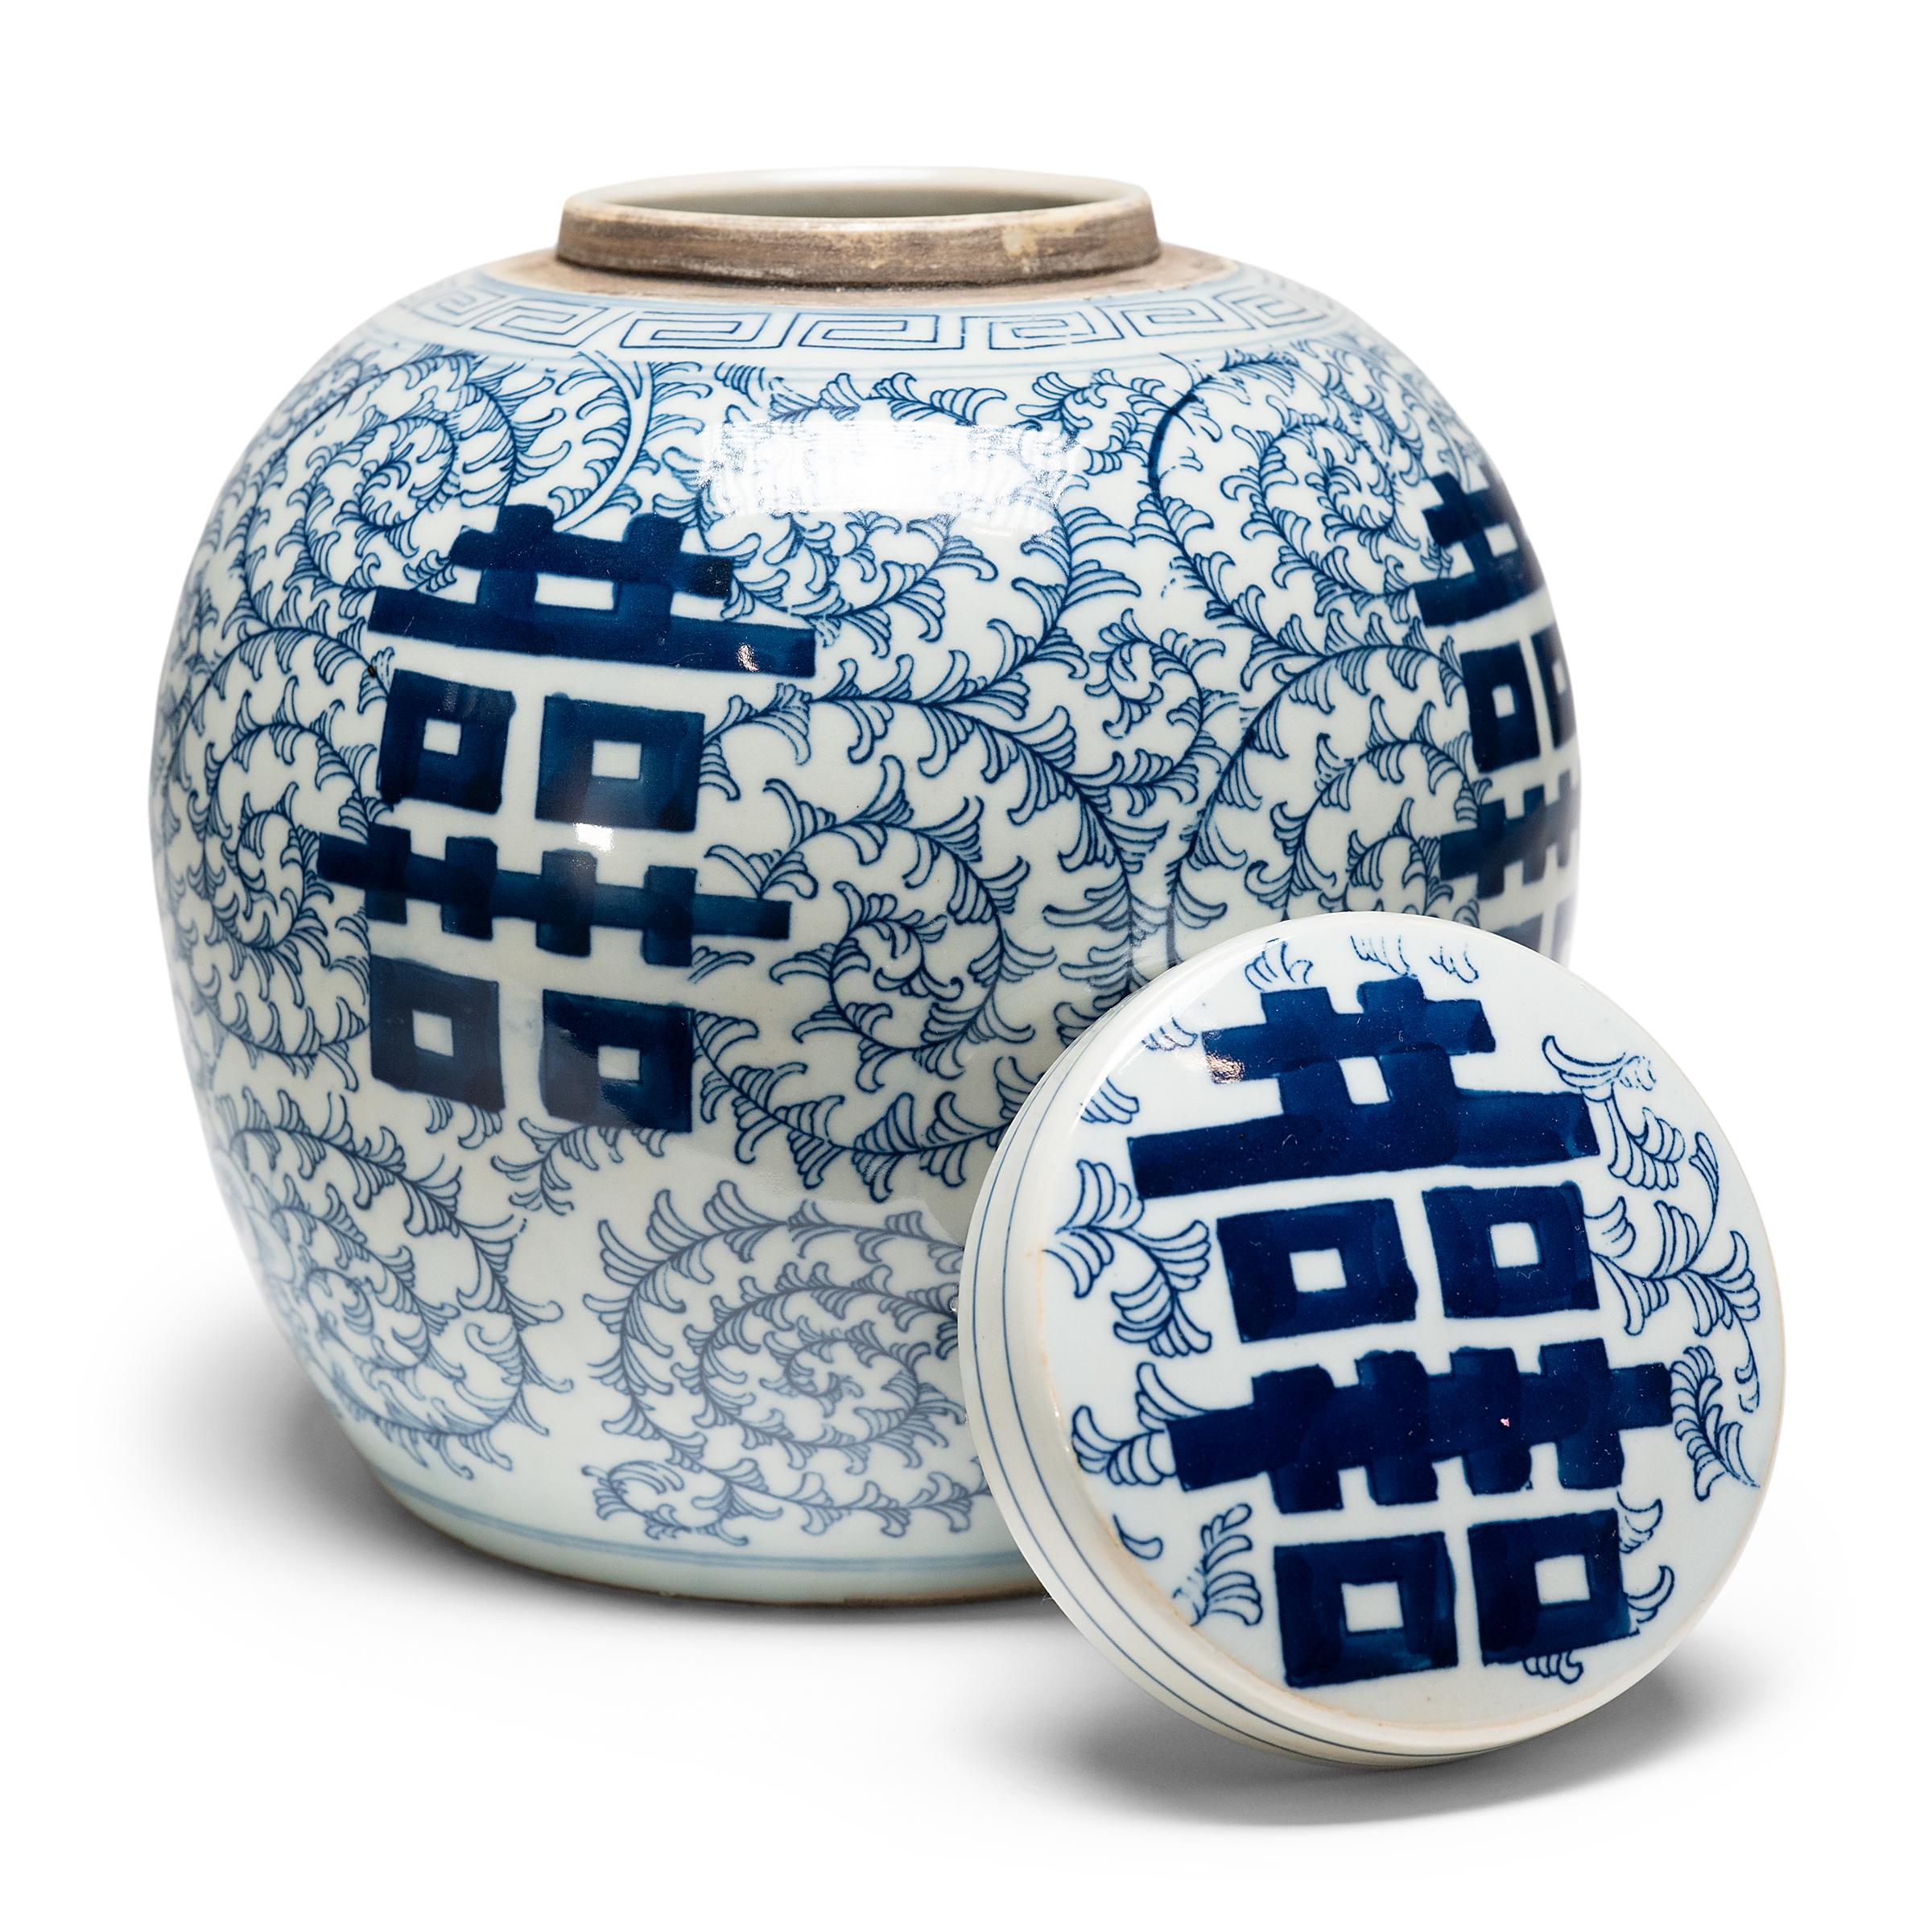 The symbol for double happiness adorns this round tea leaf jar with best wishes for love, companionship and marital bliss. Glazed in the classic blue and white manner, the porcelain jar has a rounded form and flat lid, a traditional shape for jars